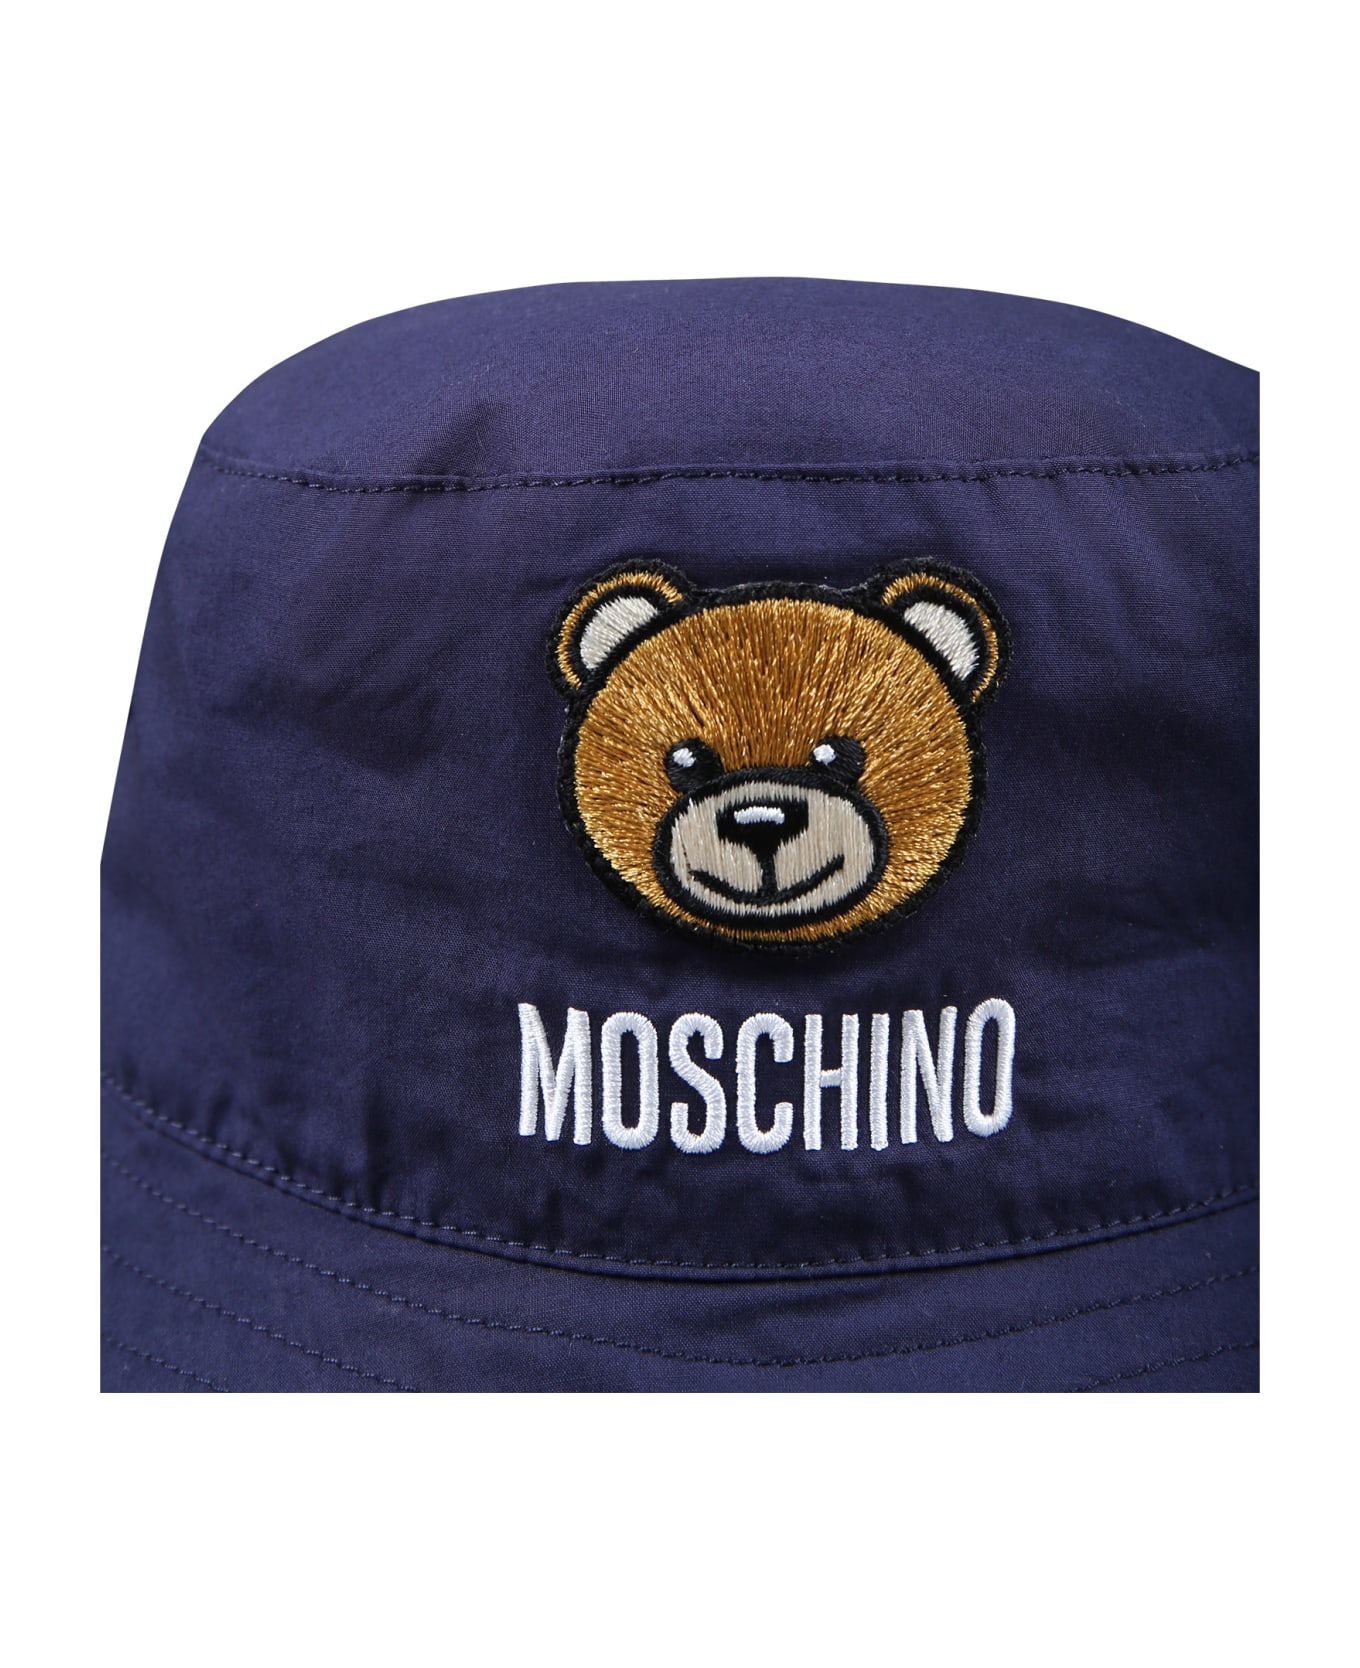 Moschino Blue Cloche For Baby Kids With Teddy Bear - Blue アクセサリー＆ギフト